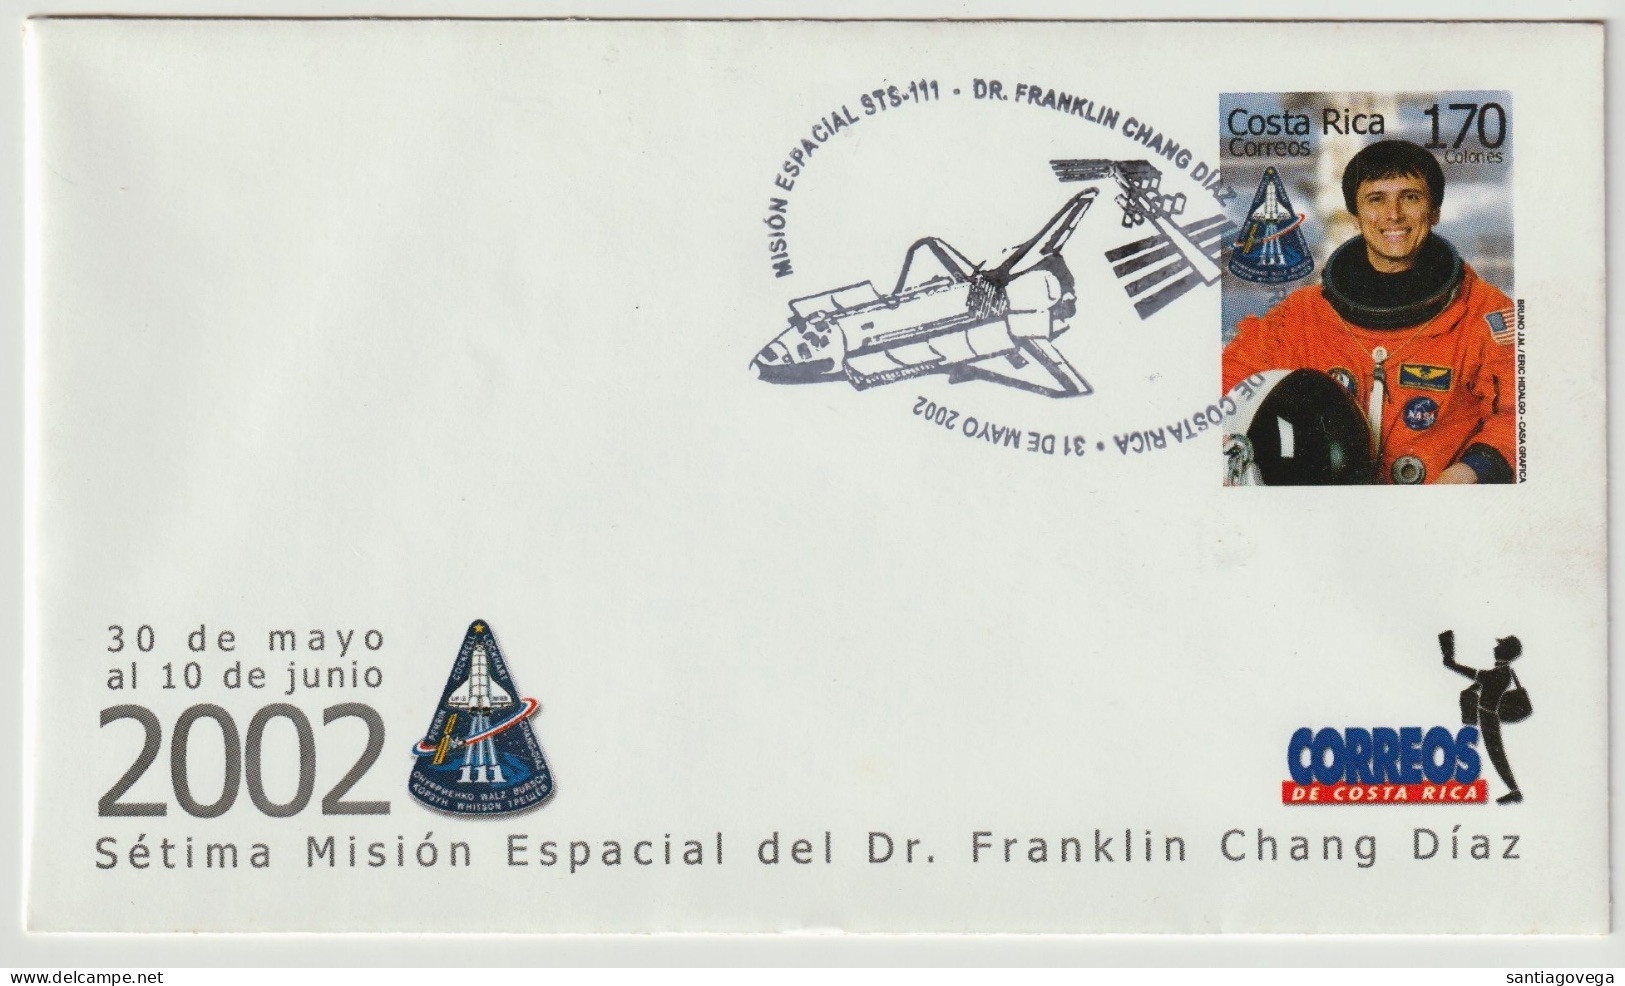 COSTA RICA - Franklin Chang - Astronaut - NASA STS111 - 2002 - First Day Cover - #431 - Costa Rica